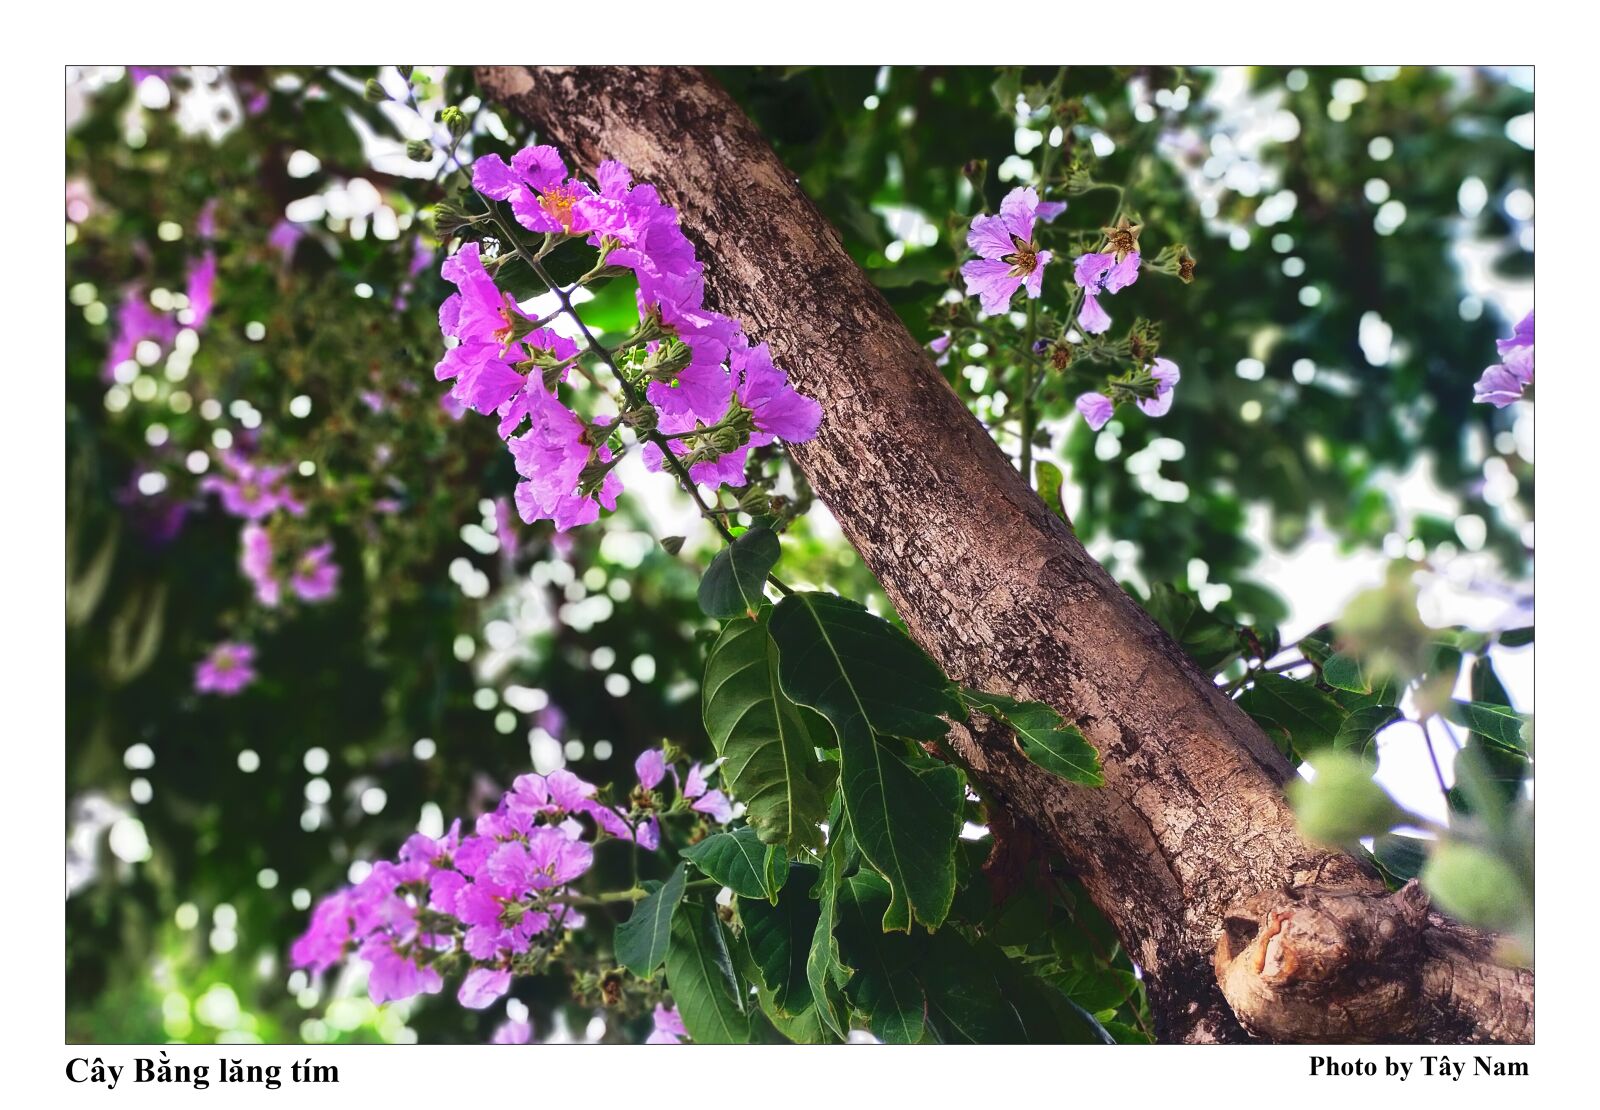 OPPO A9 2020 sample photo. Flower, purple flowers, the photography